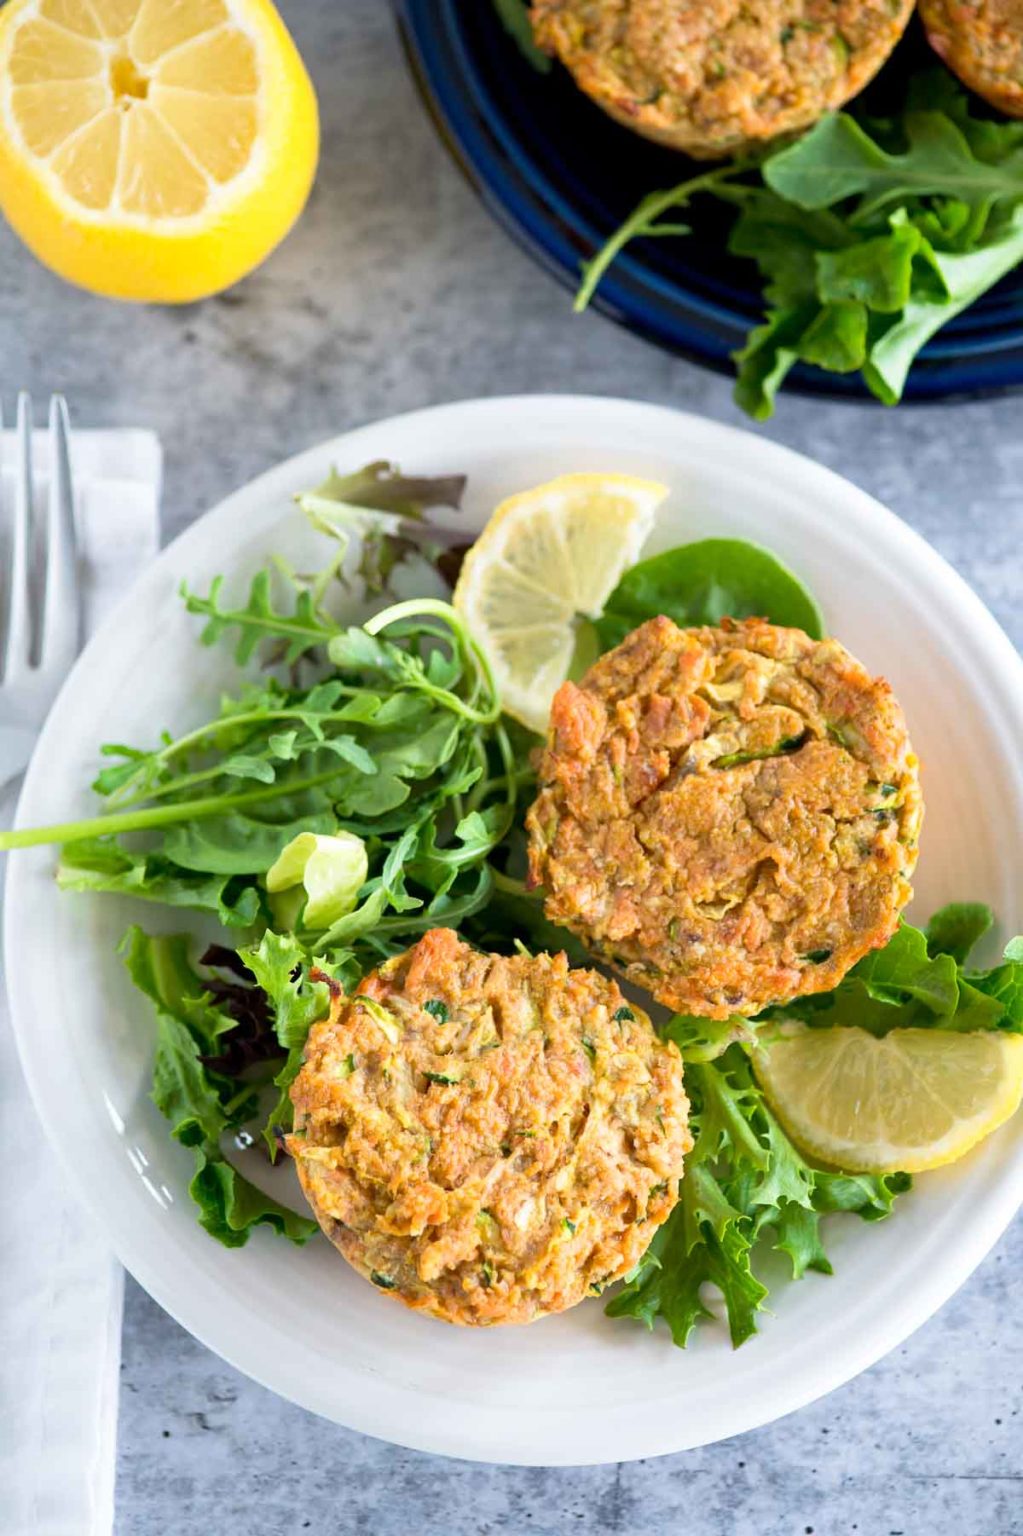 Salmon Cakes - PROTEIN PACKED easy recipe using canned salmon!